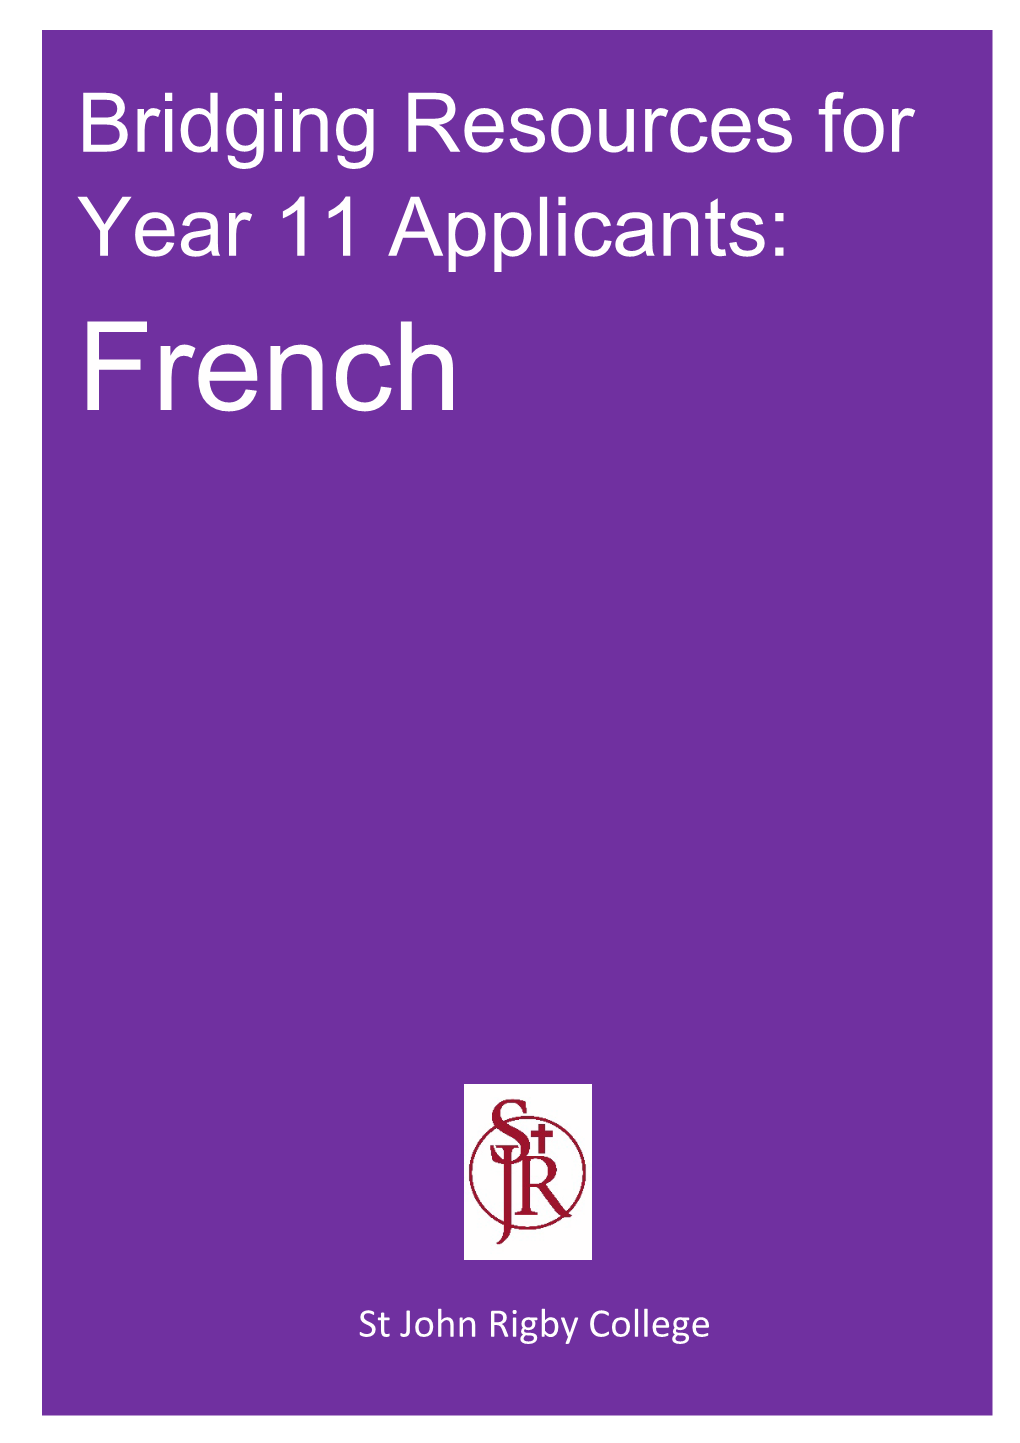 Bridging Resources for Year 11 Applicants: French